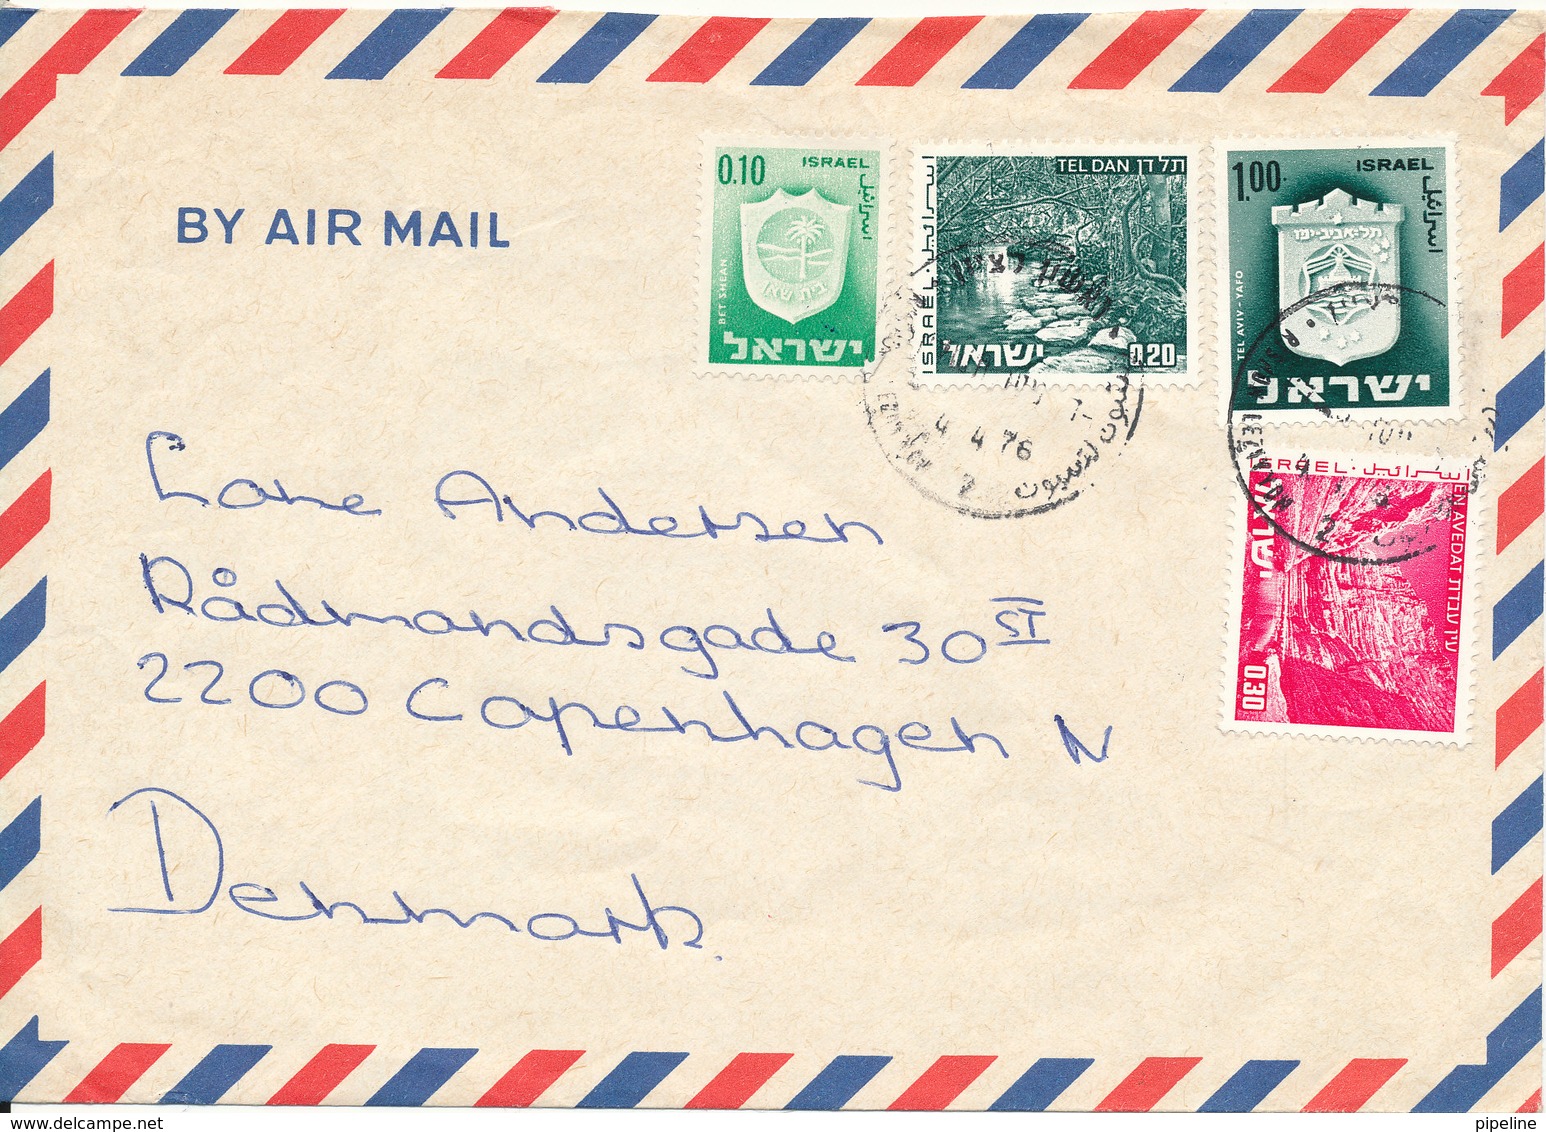 Israel Air Mail Cover Sent To Denmark 4-4-1976 - Airmail